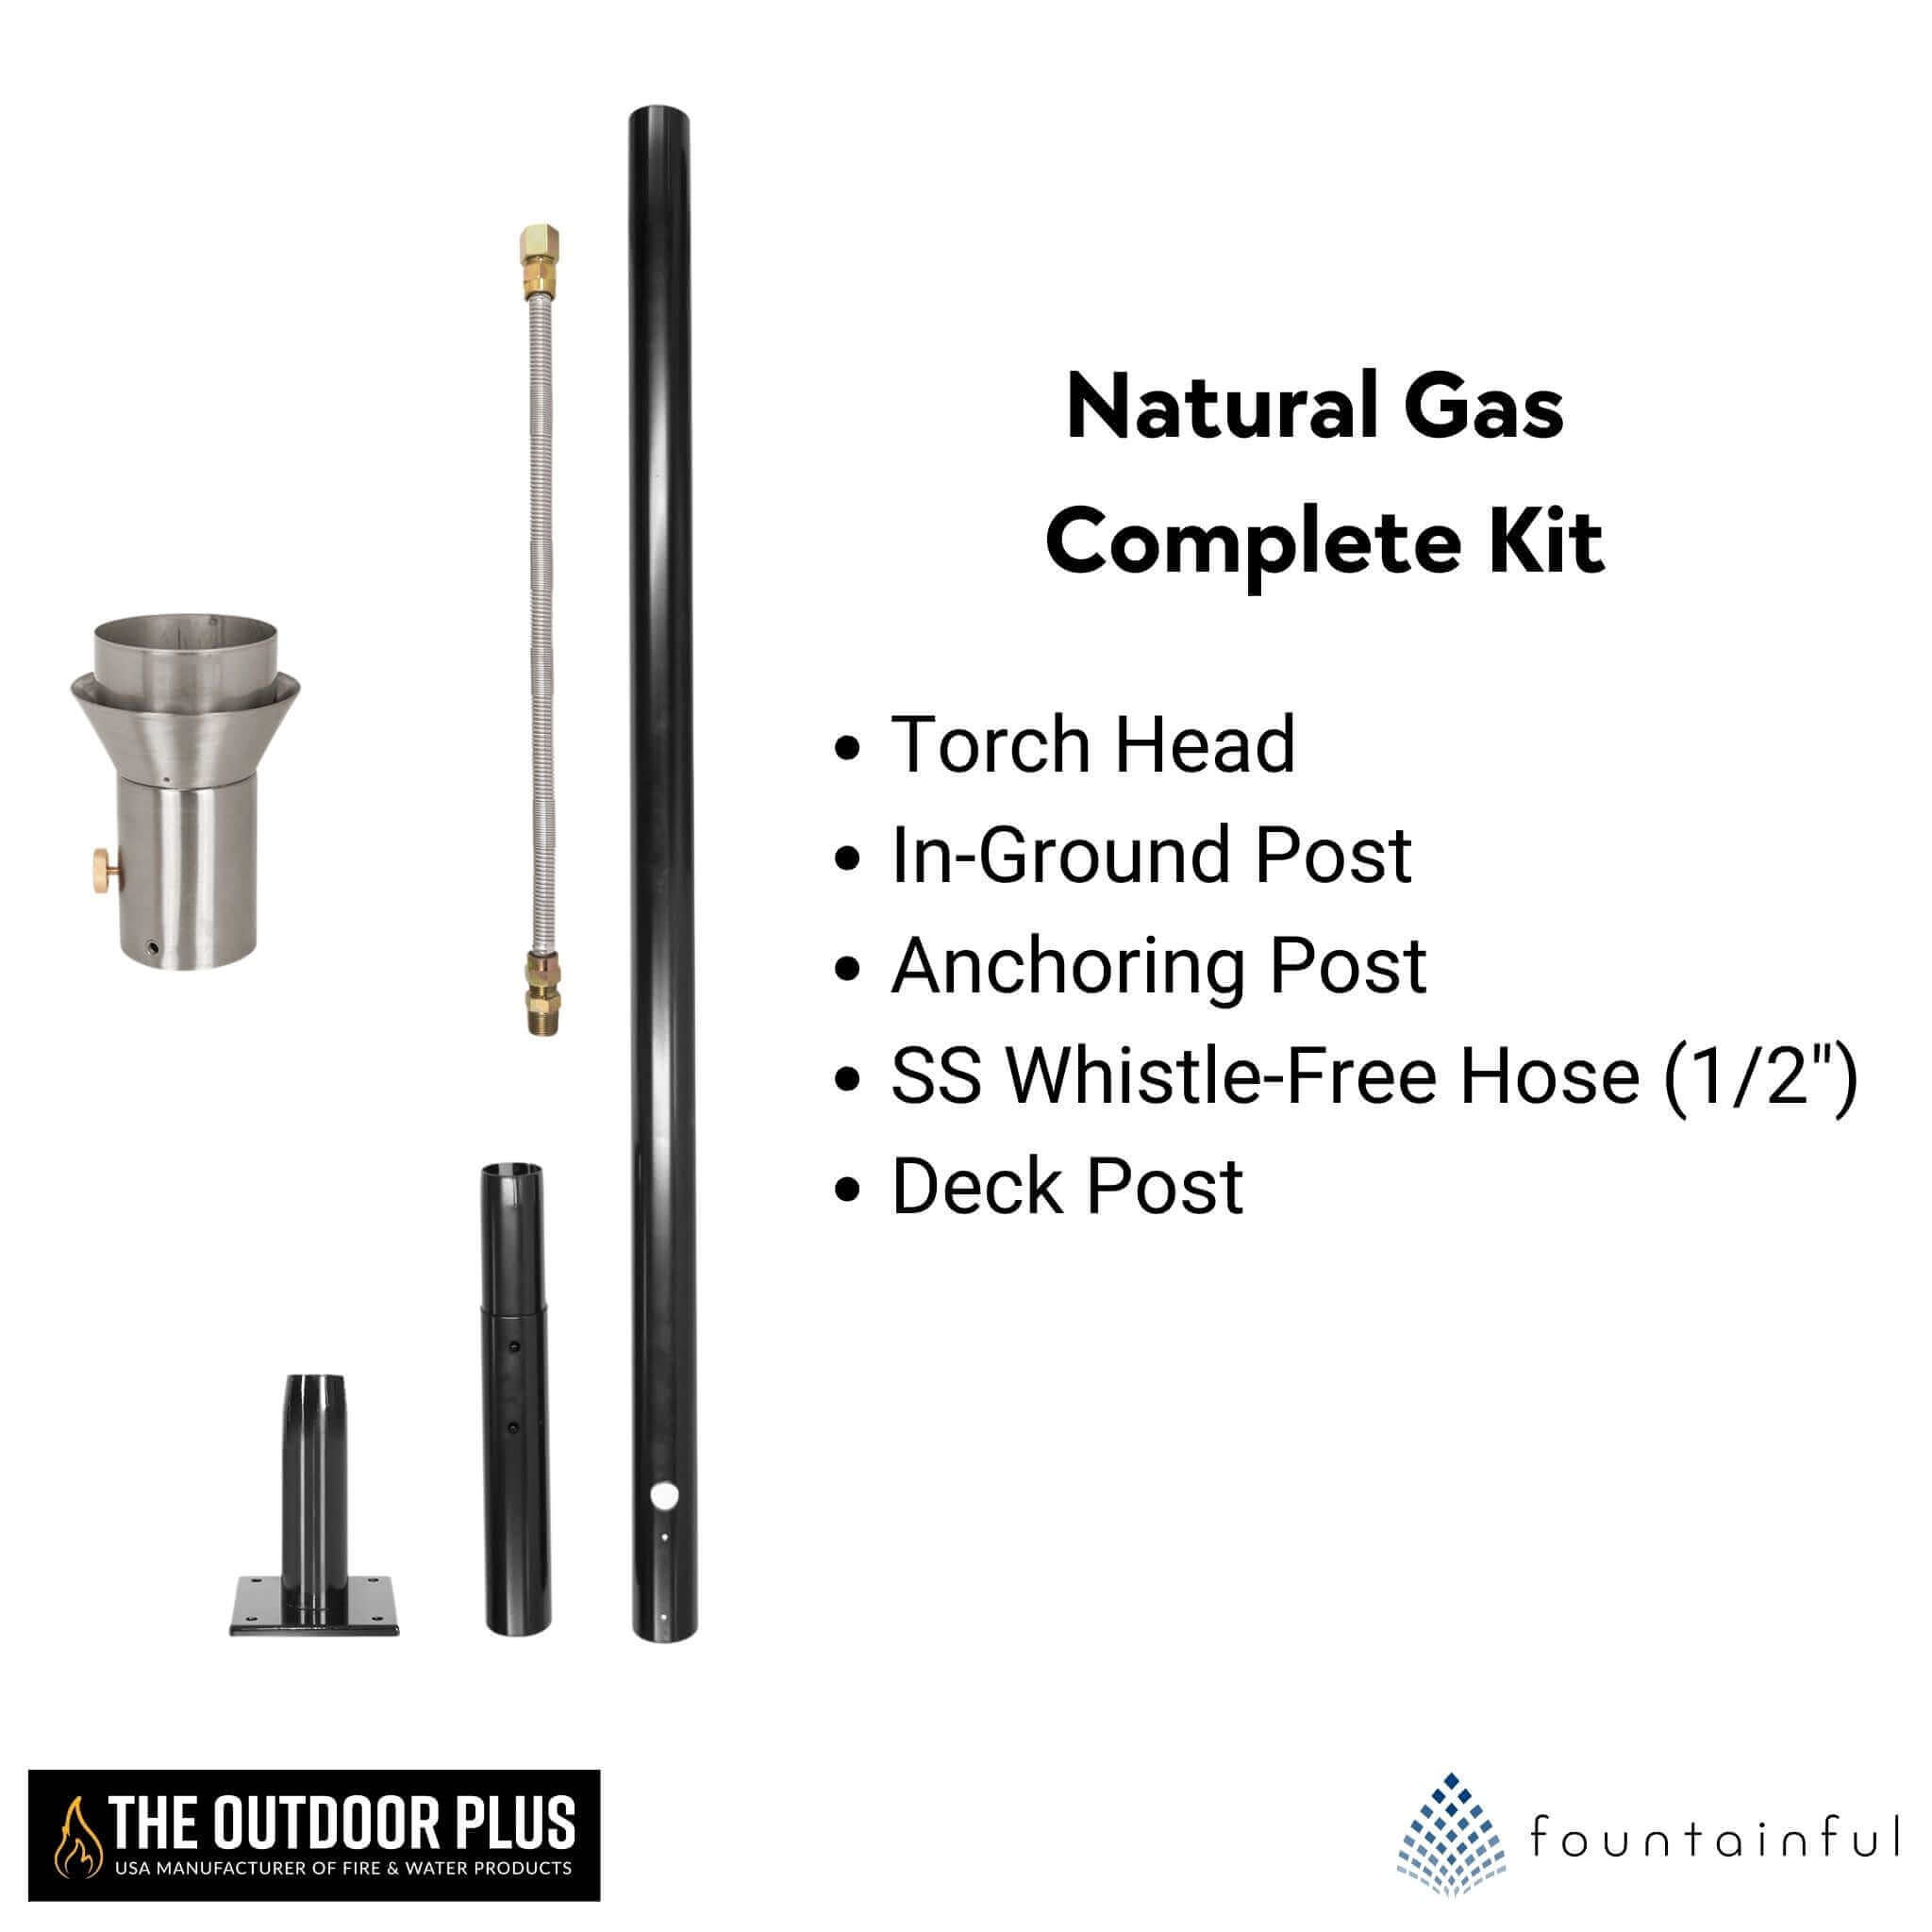 Comet Fire Torch COMPLETE KIT - Stainless Steel - The Outdoor Plus